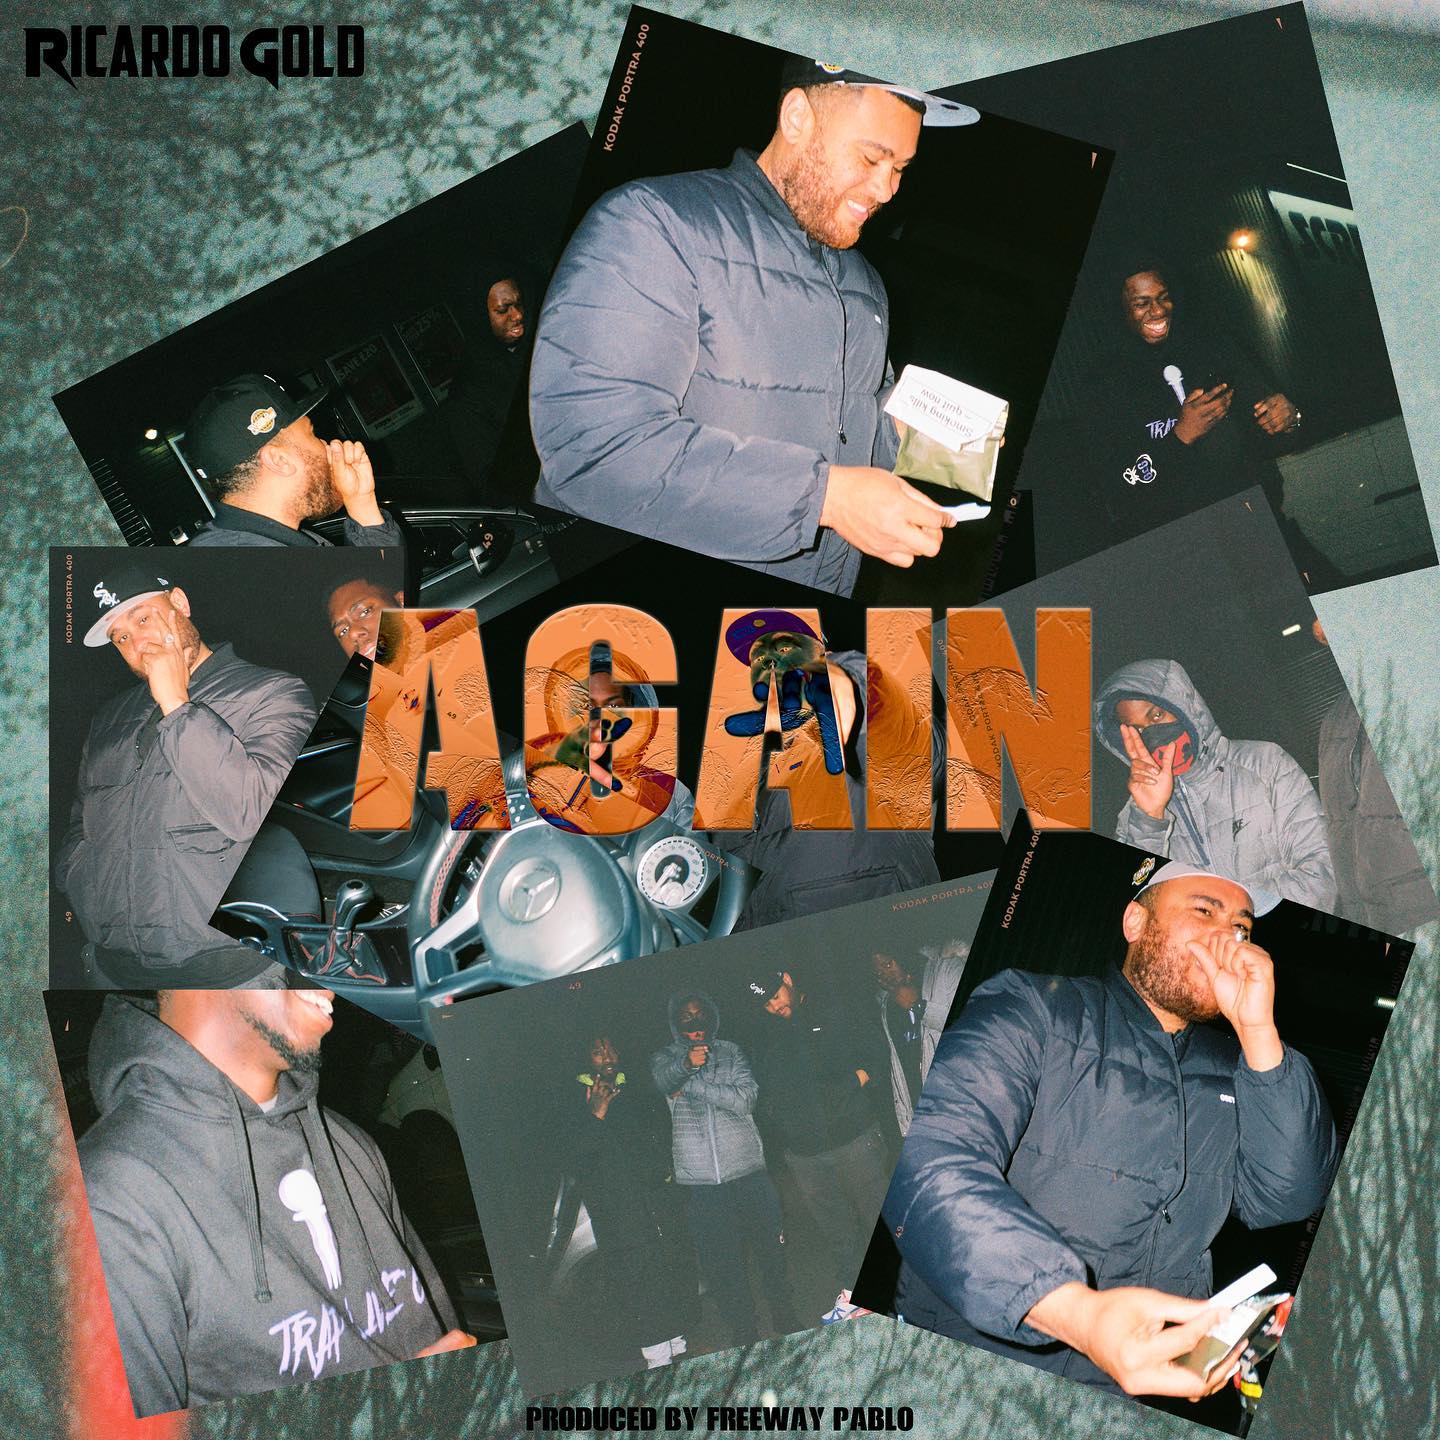 A Chat With Ricardo Gold – ‘AGAIN’ Available on Spotify UK Now